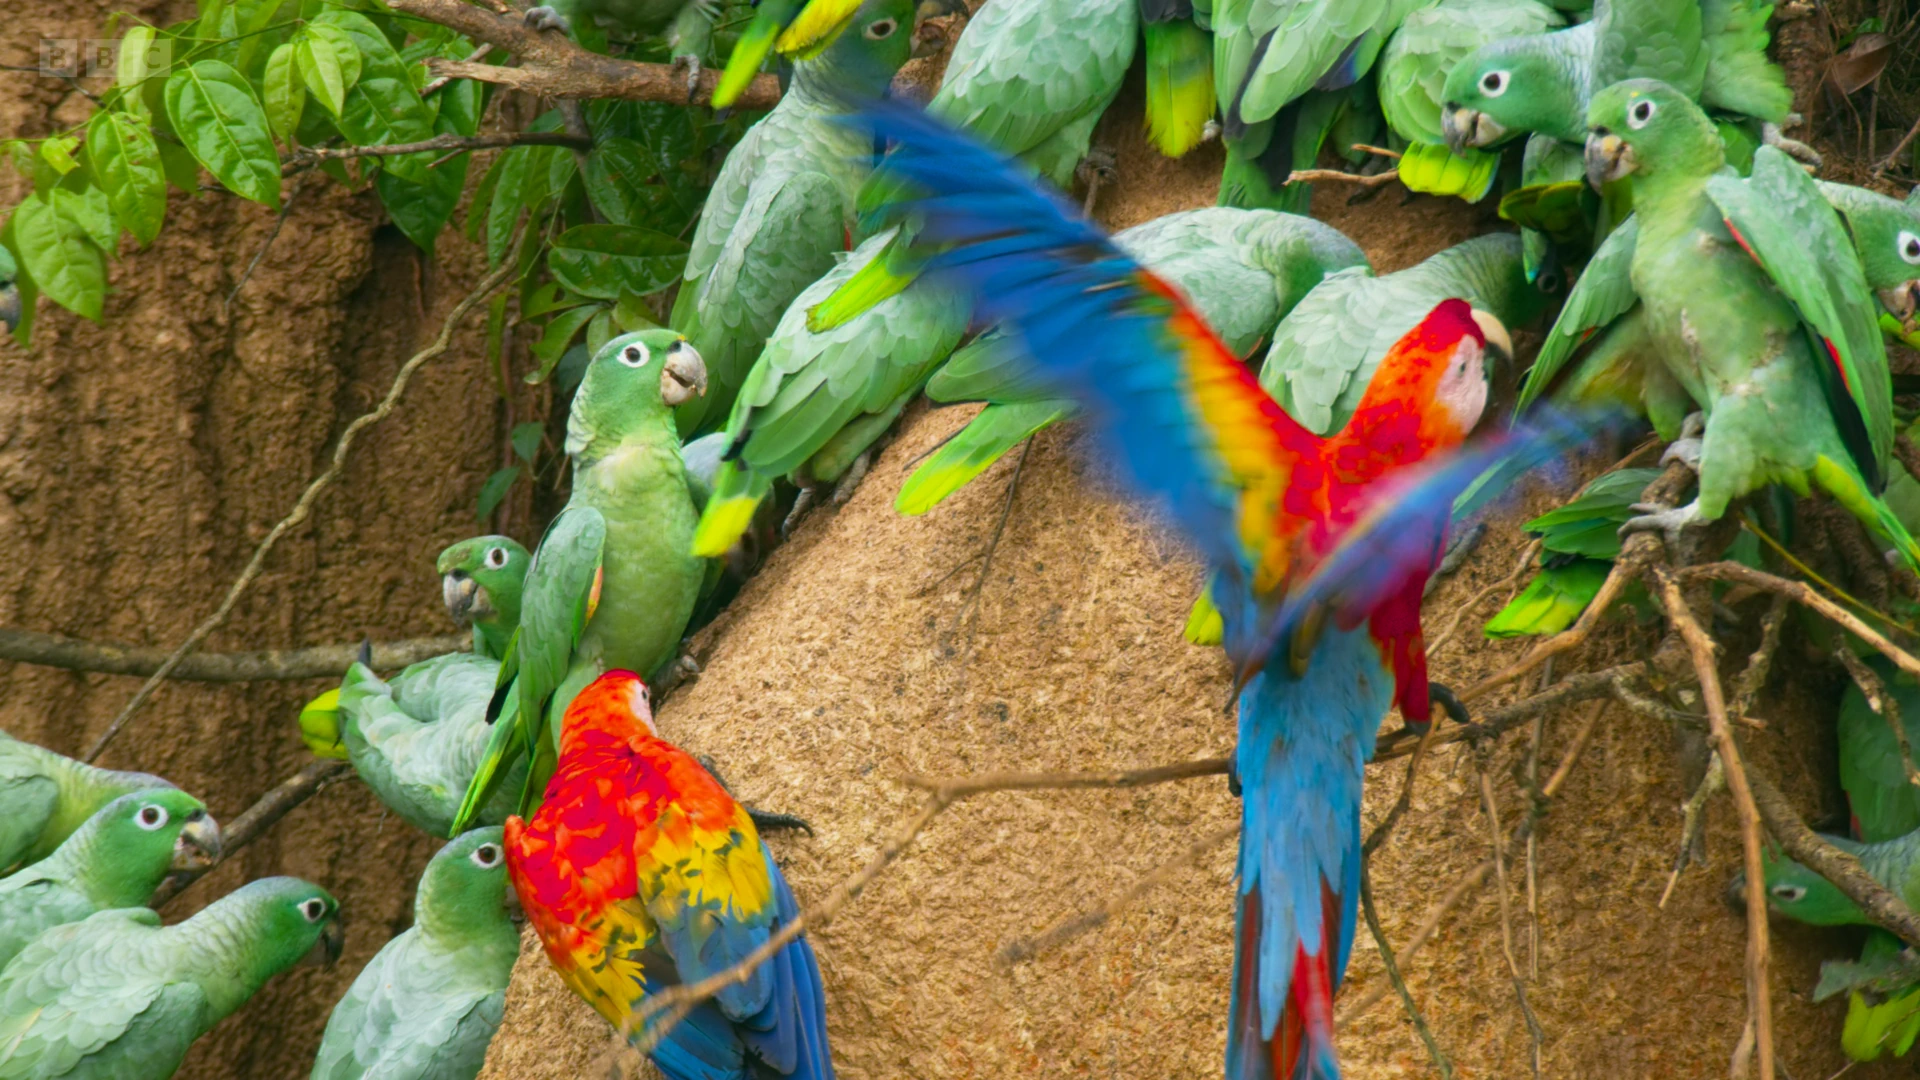 Southern mealy parrot (Amazona farinosa) as shown in Seven Worlds, One Planet - South America